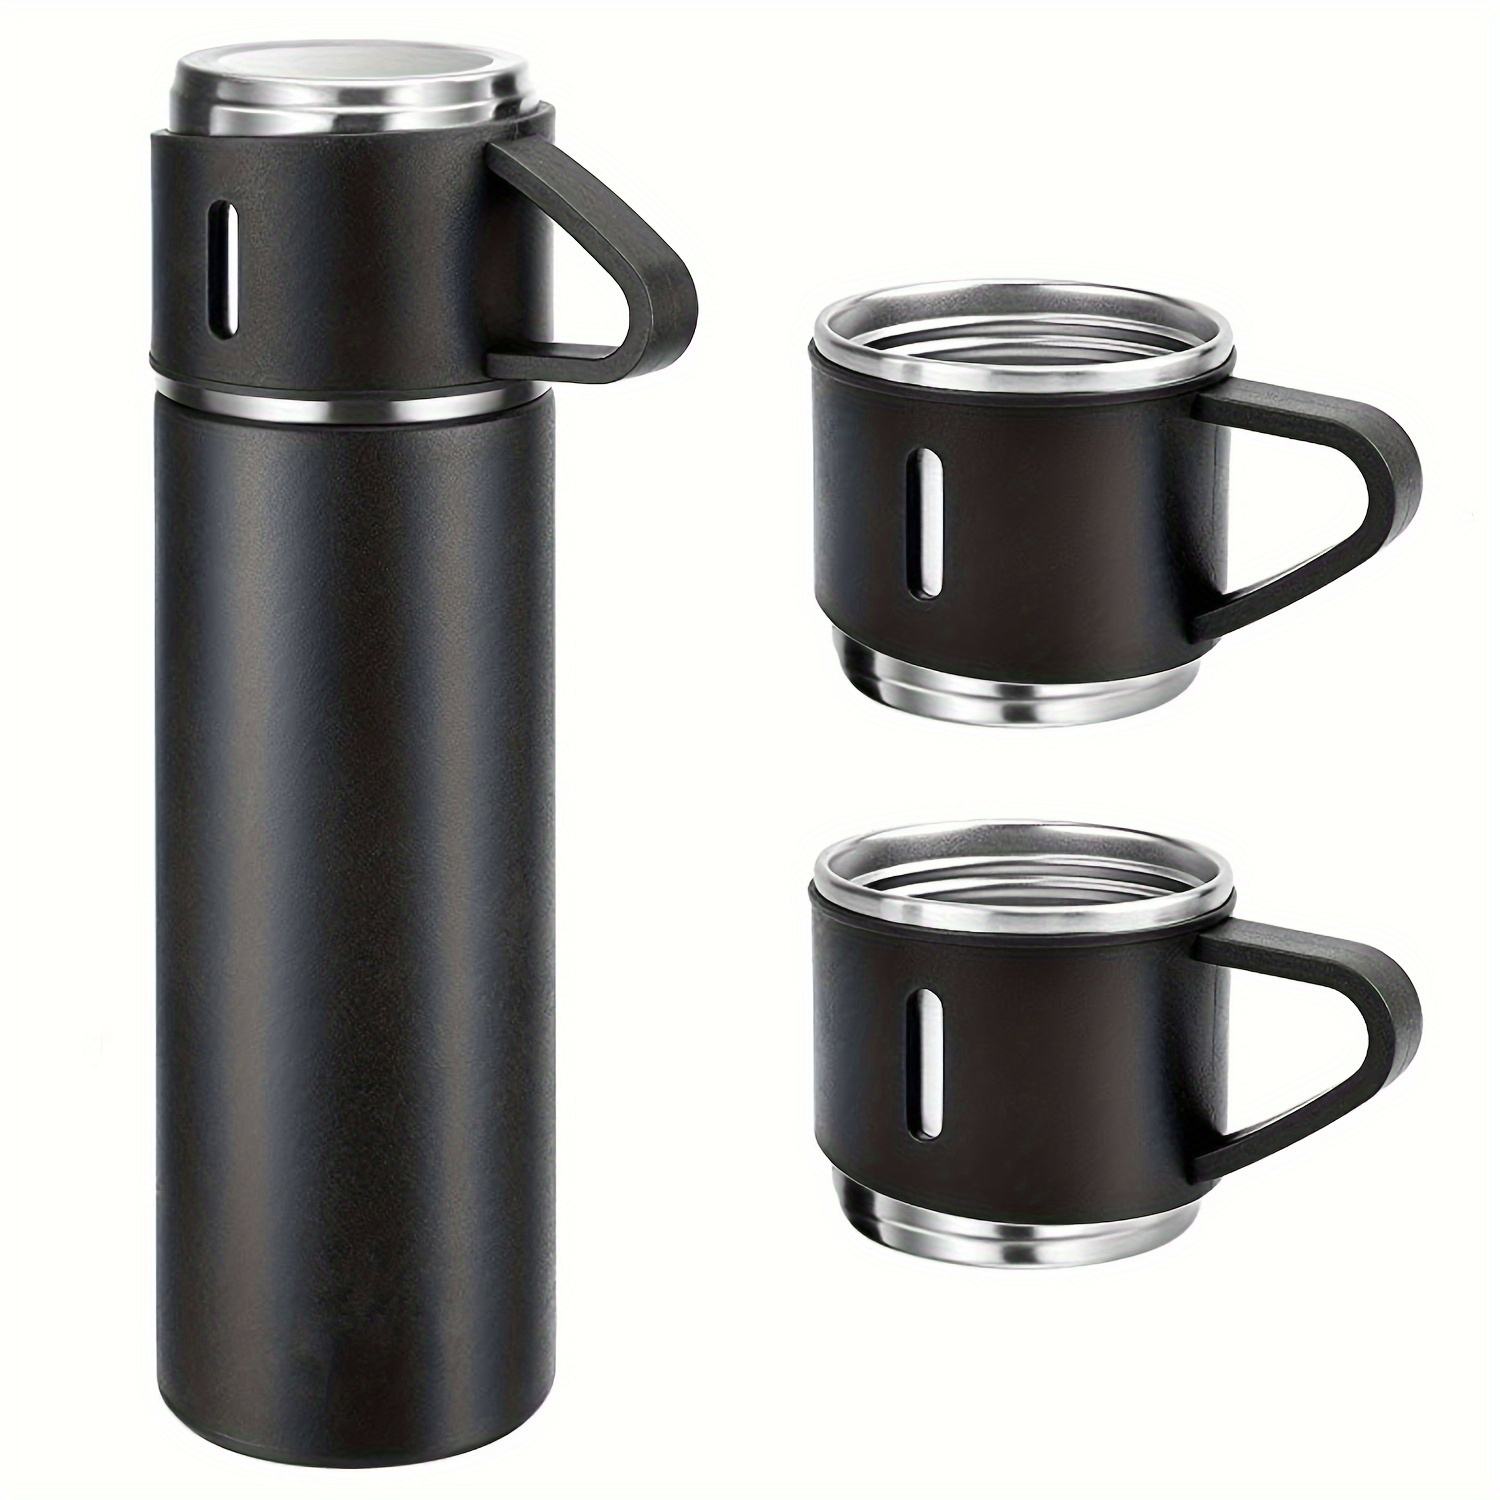 

1 Set Business Thermal Mug 500ml/16.9oz - Stainless Steel Vacuum Insulated Bottle With 2 Cups | Coffee & Cold Drink | Leakproof Water Container | Ideal For School, Office & Father's Day Gift